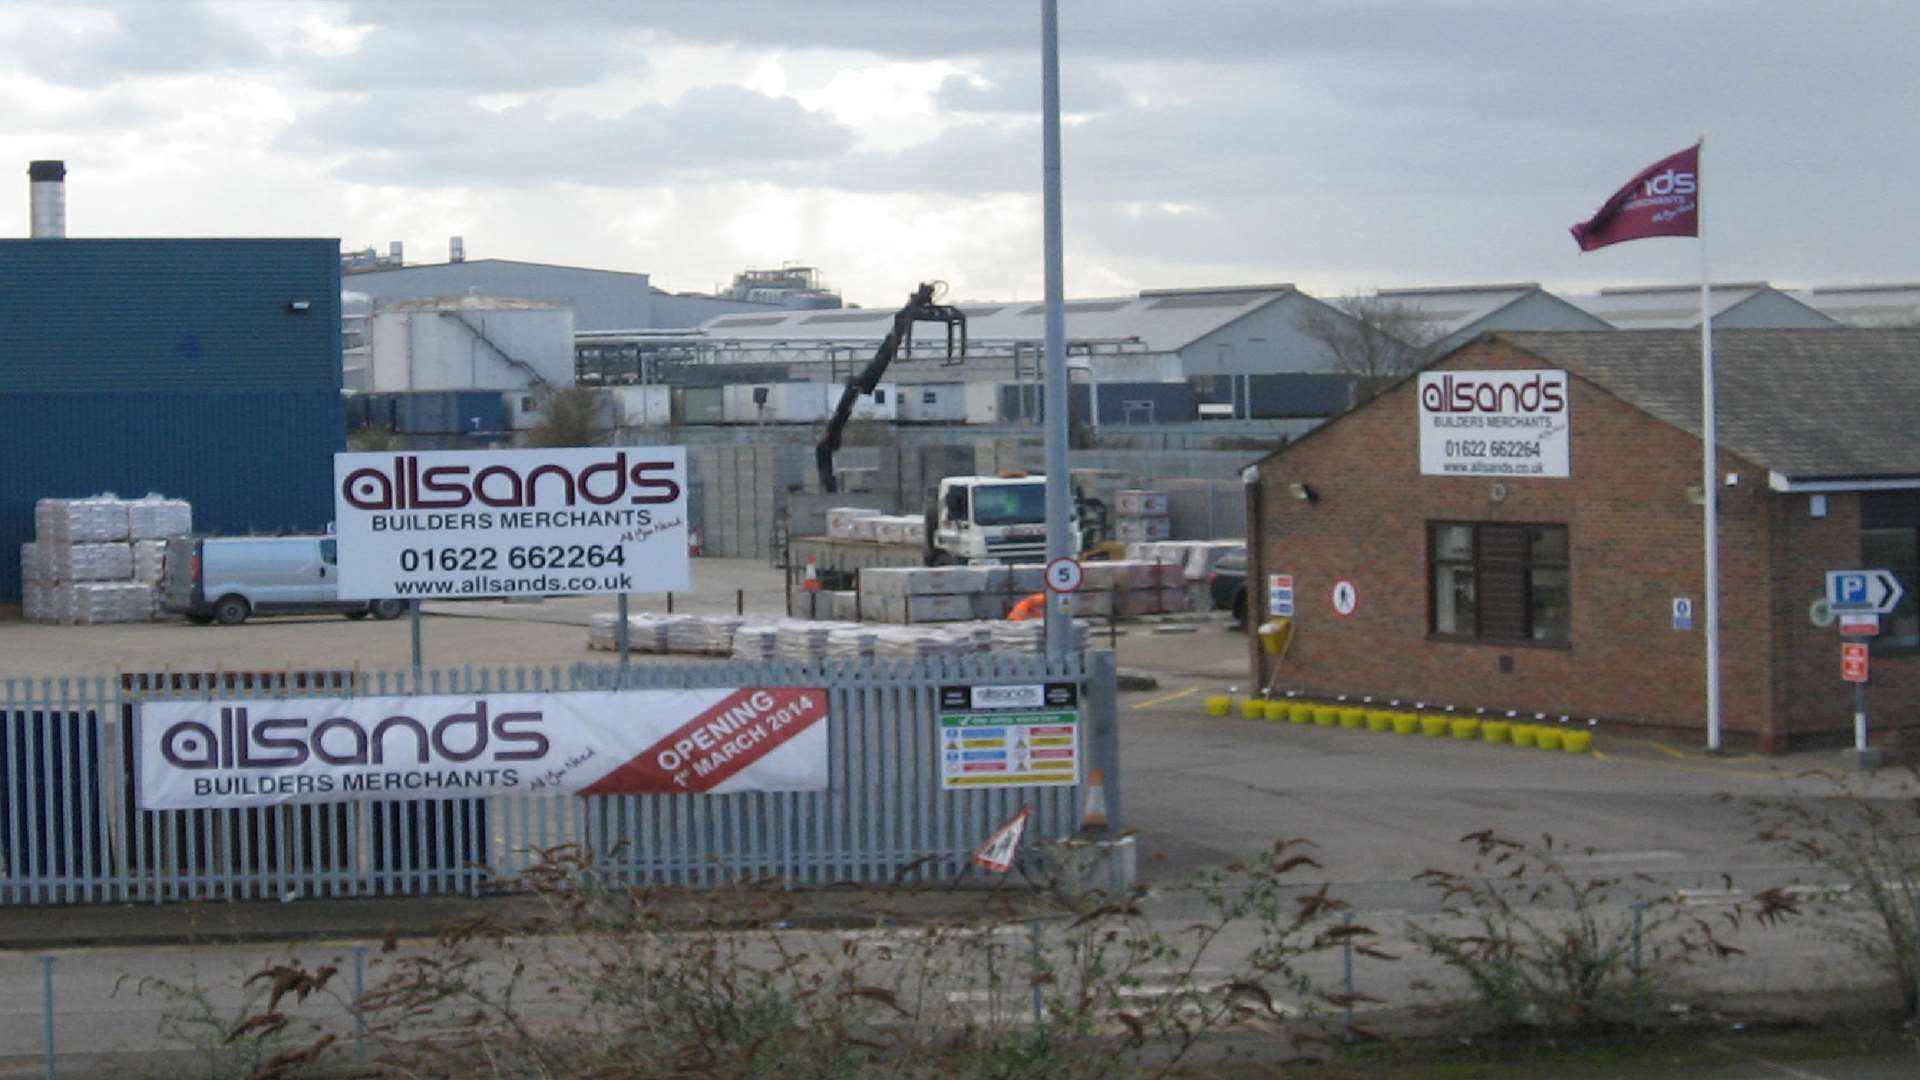 Allsands Supplies in Larkfield has been acquired by Grafton Group